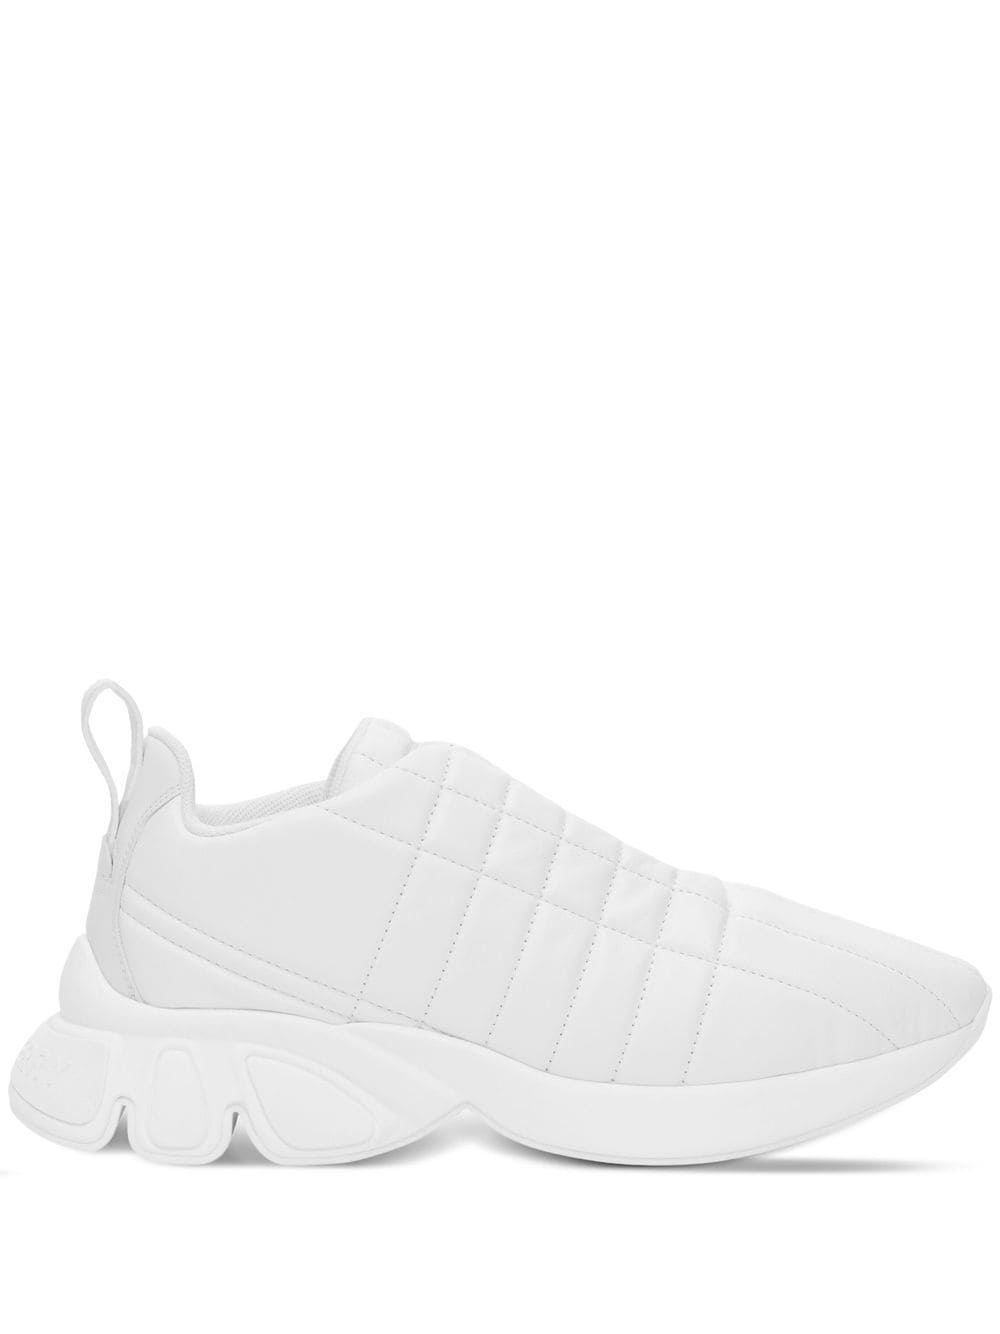 Burberry quilted lace-up sneakers - White von Burberry